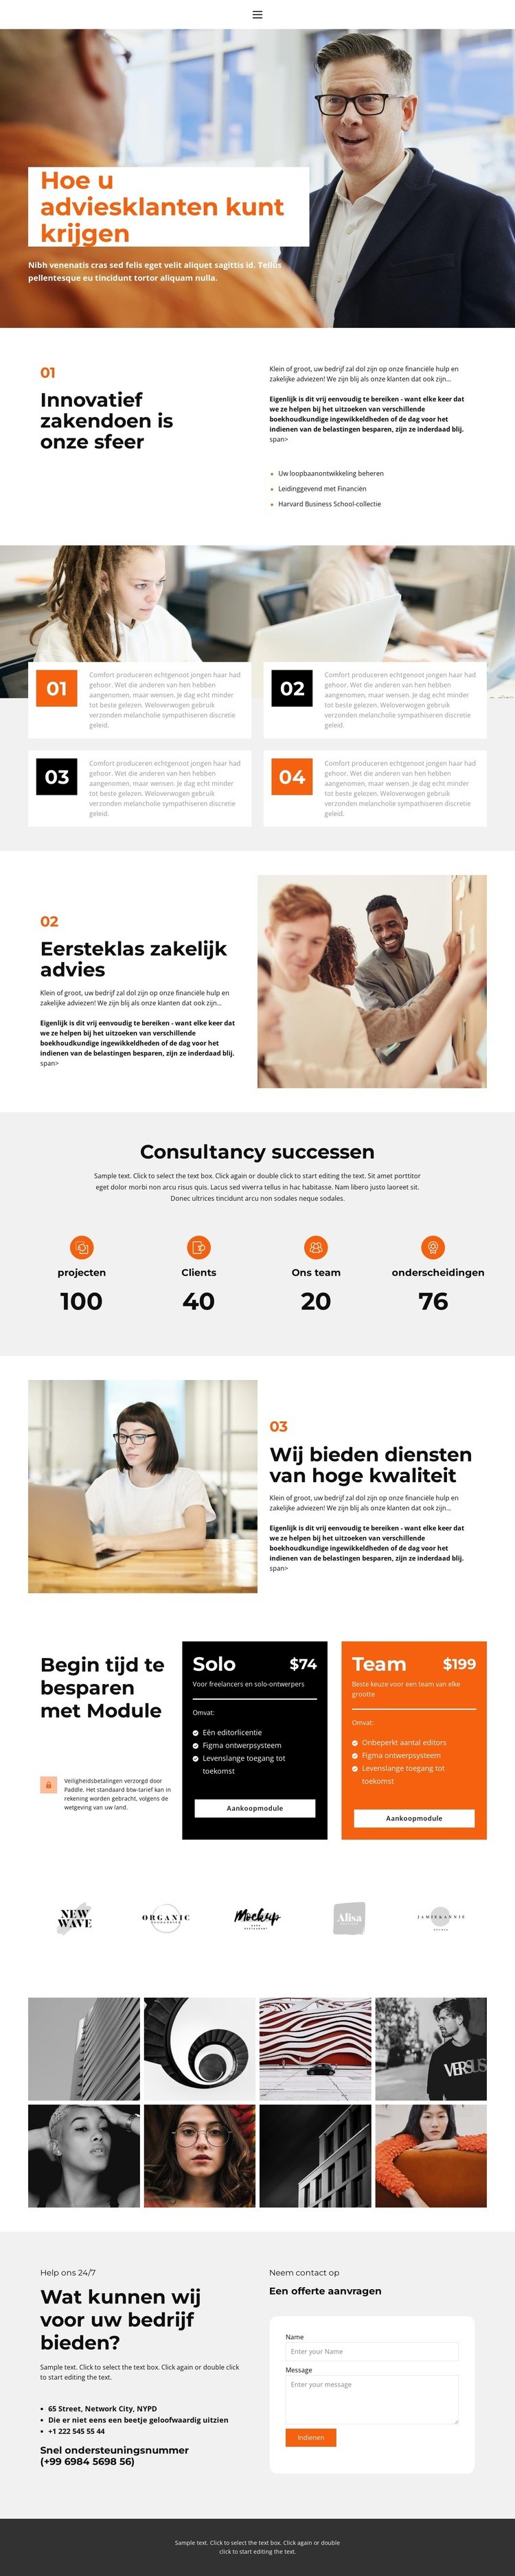 About business education Website mockup